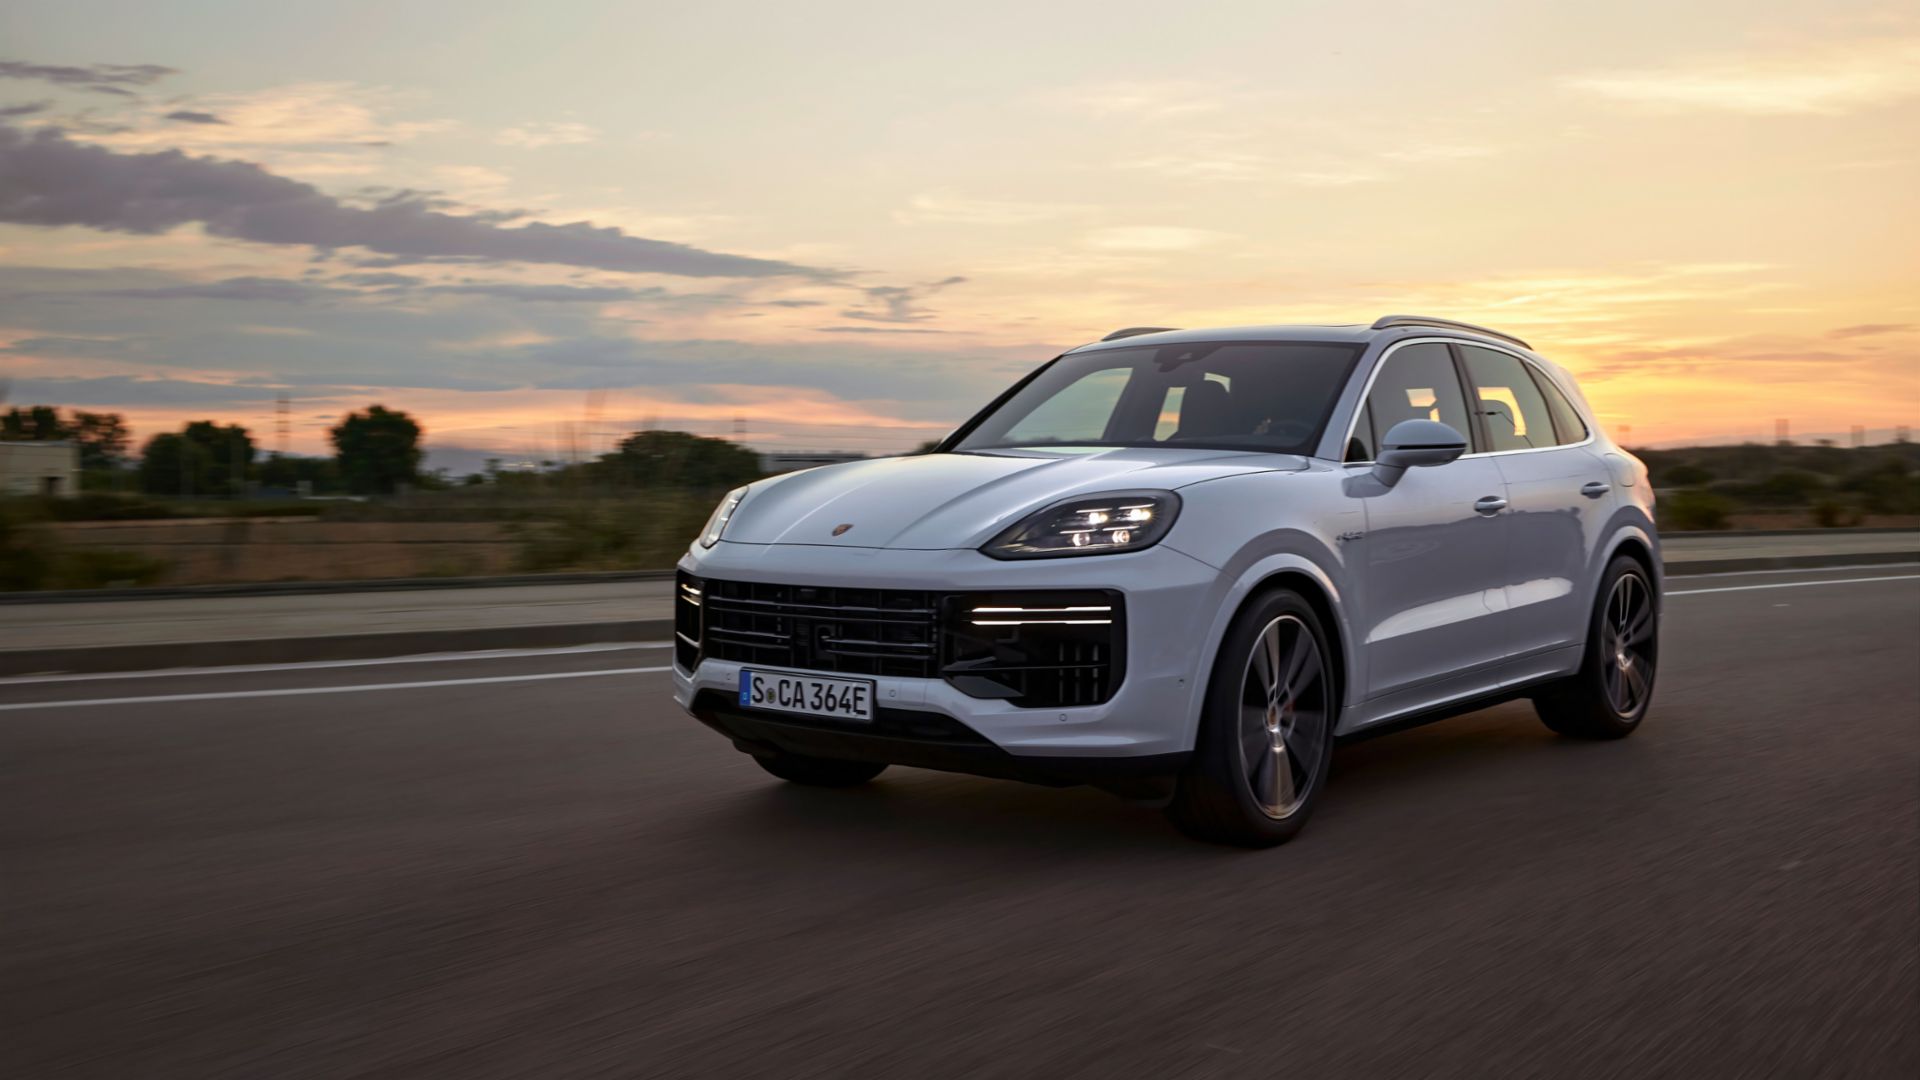 The 2023 Porsche Cayenne Turbo E-Hybrid is the most powerful Cayenne ever